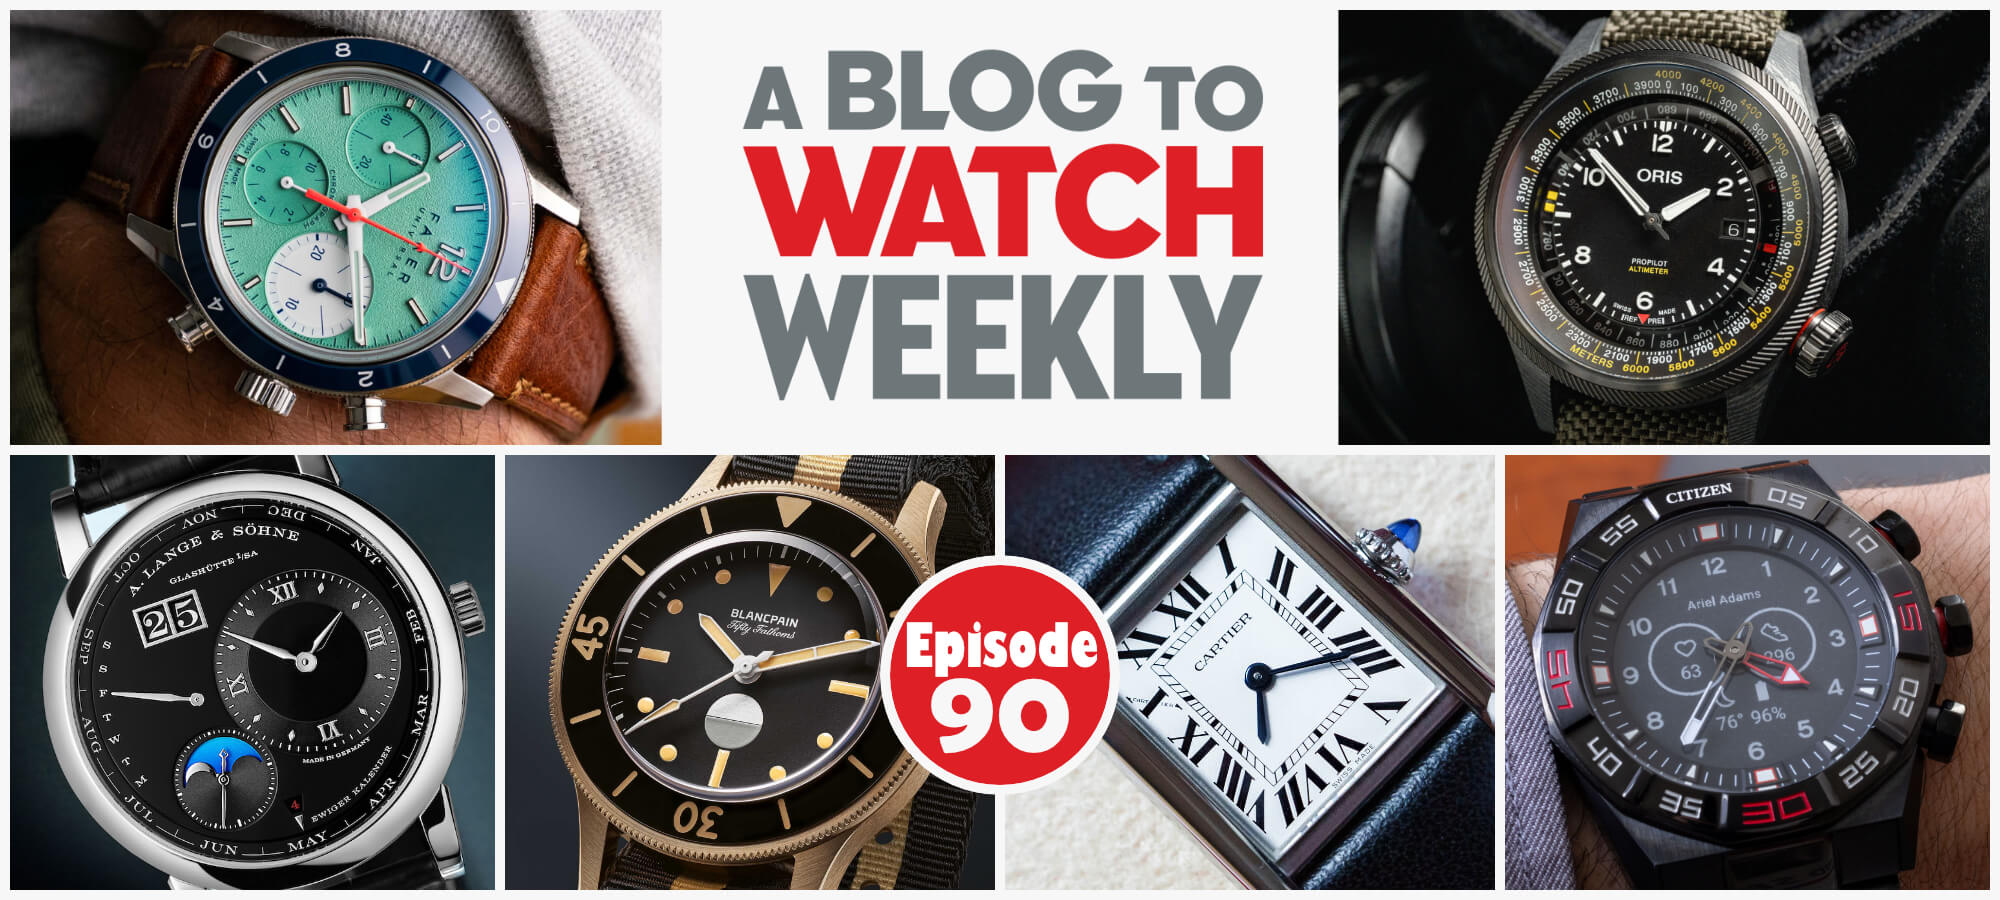 aBlogtoWatch Weekly Episode 90